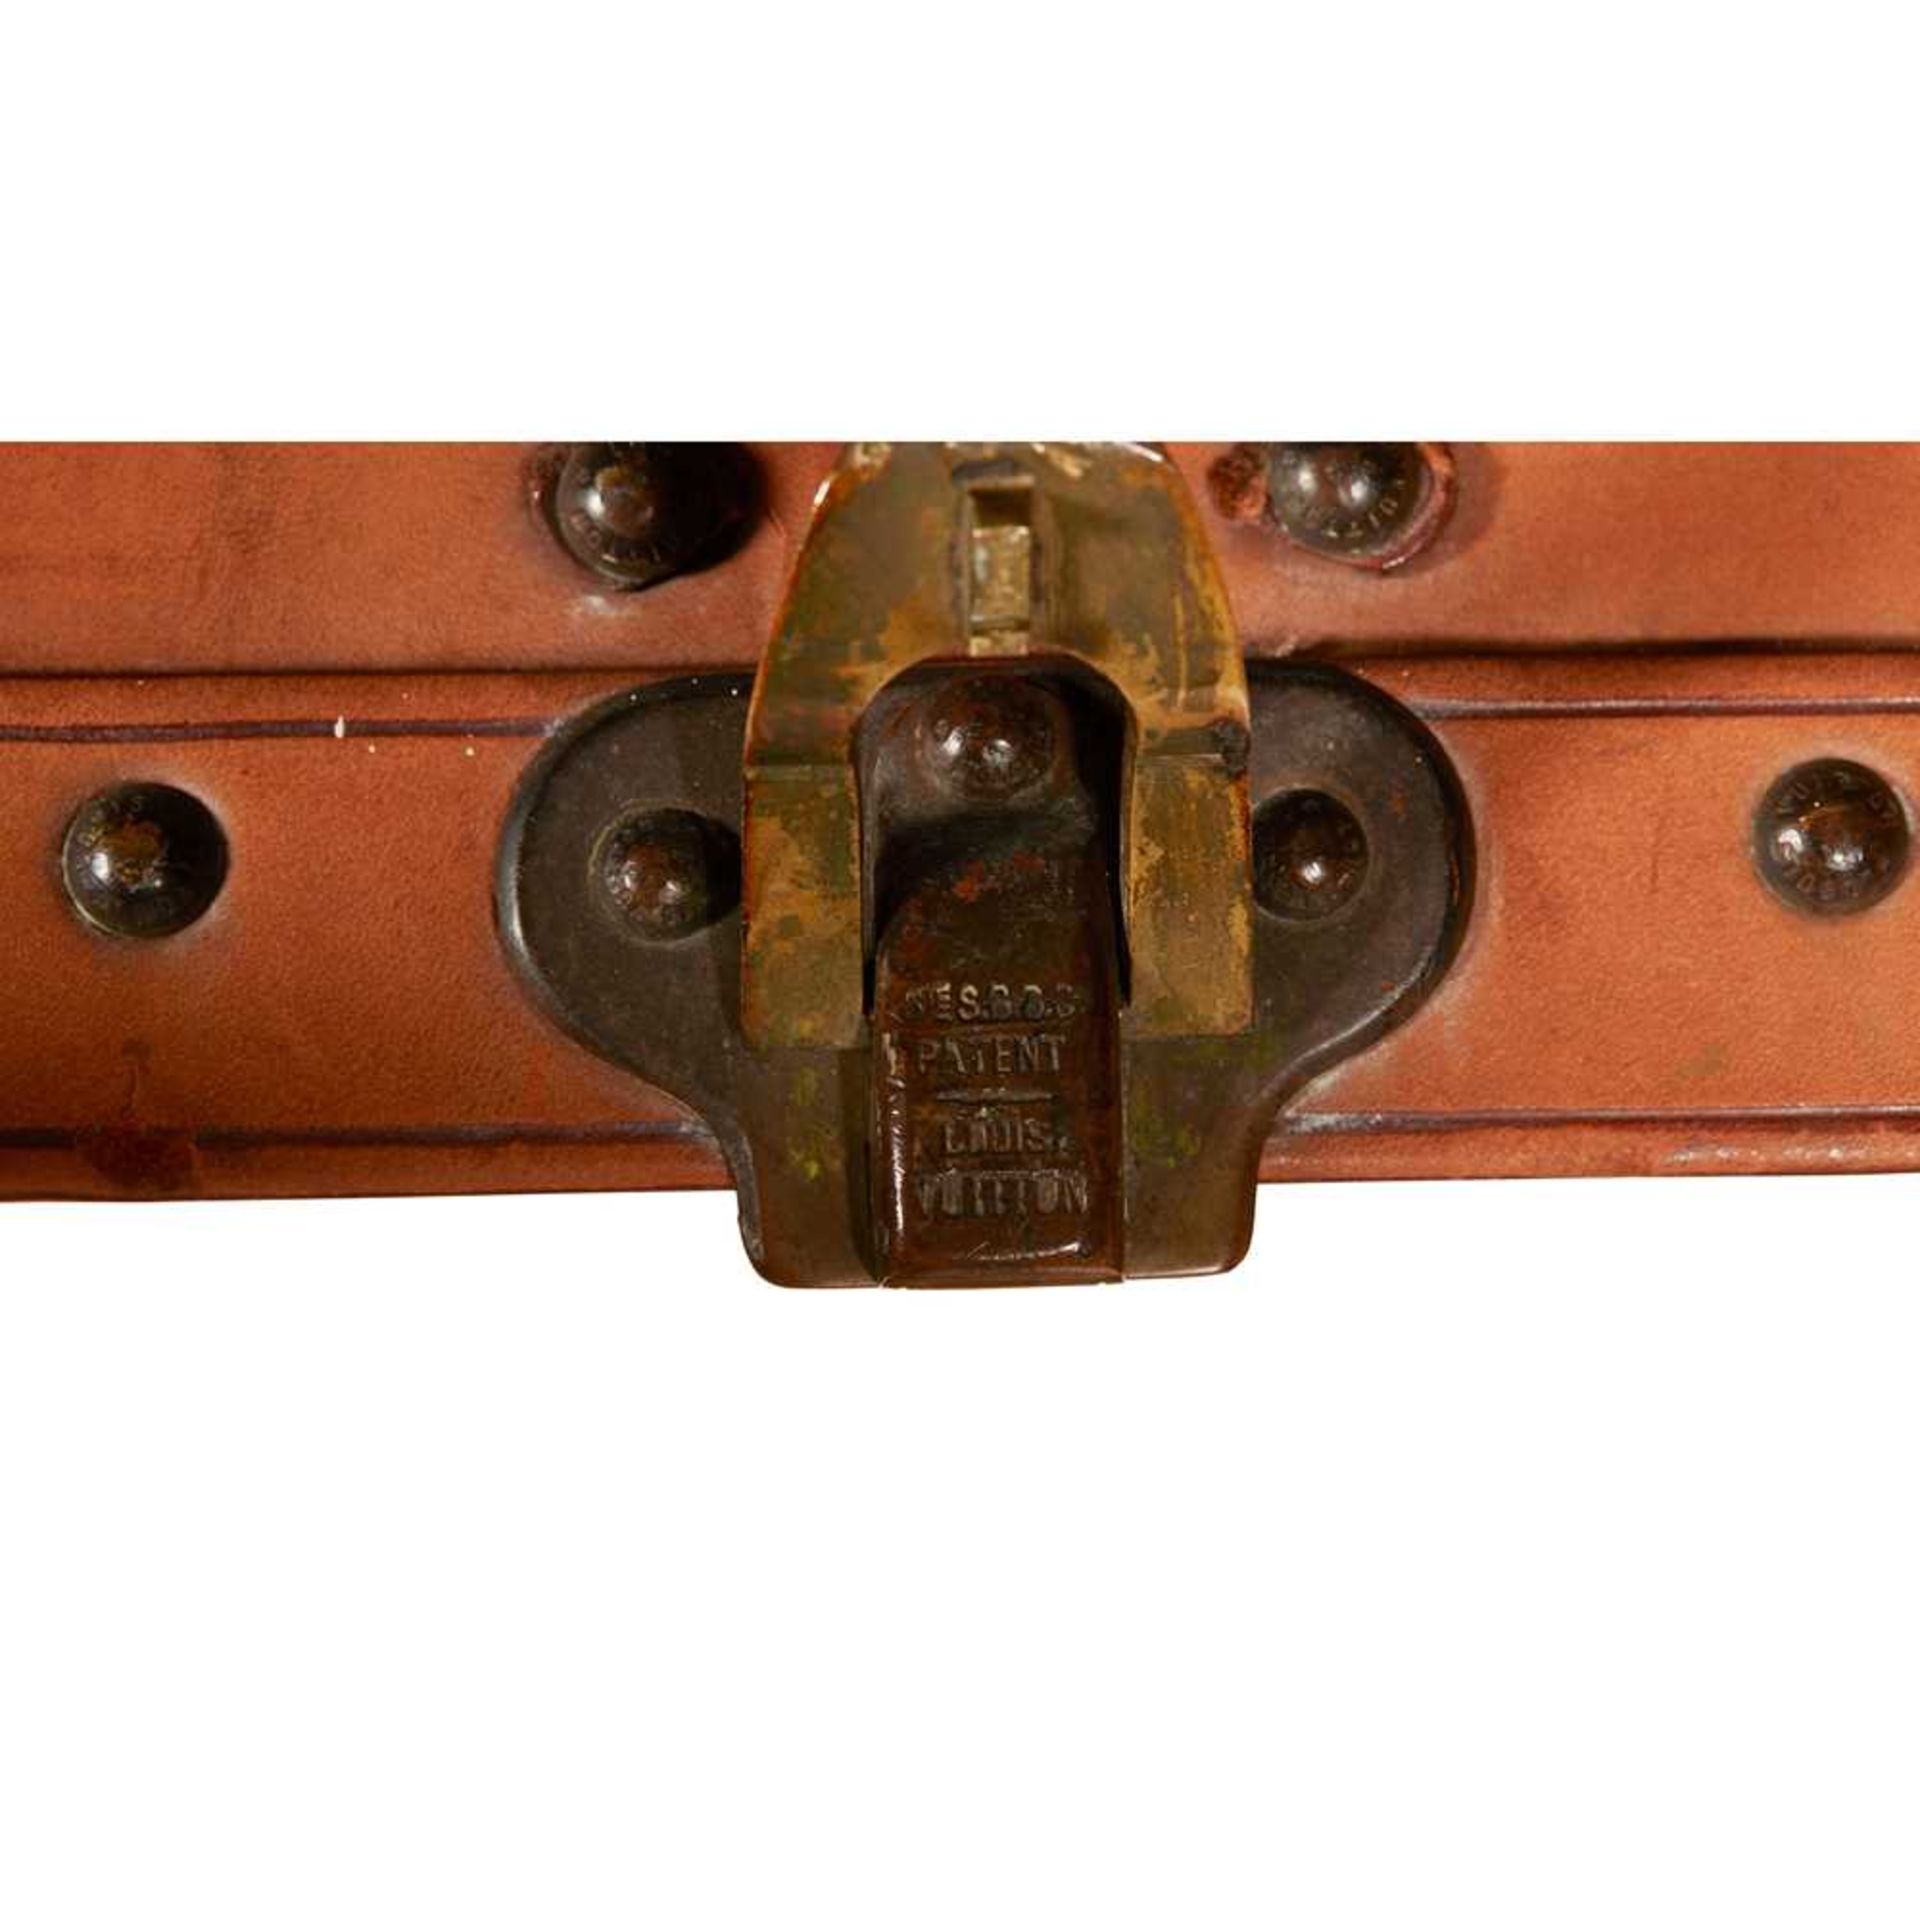 LOUIS VUITTON LEATHER TRUNK EARLY 20TH CENTURY - Image 3 of 3